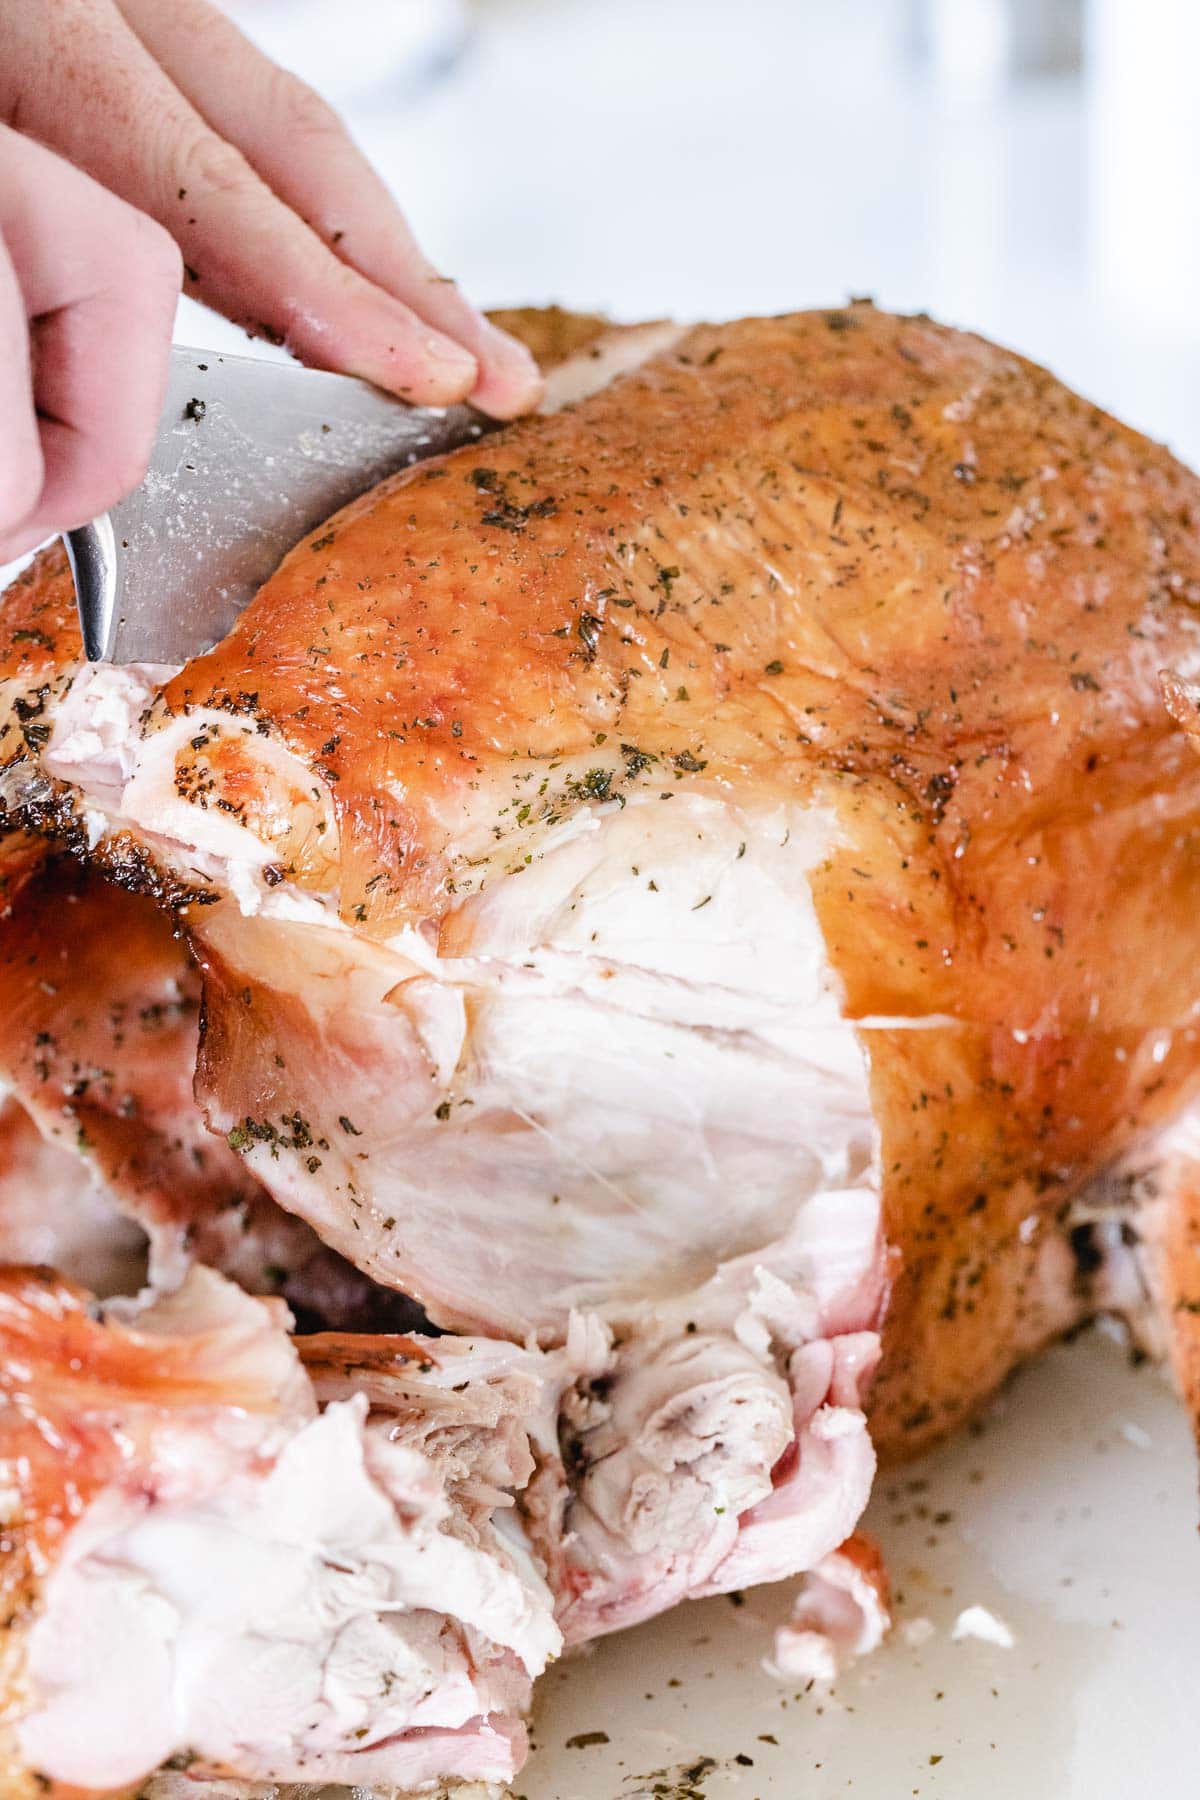 A knife slicing into a cooked turkey that already has the legs removed